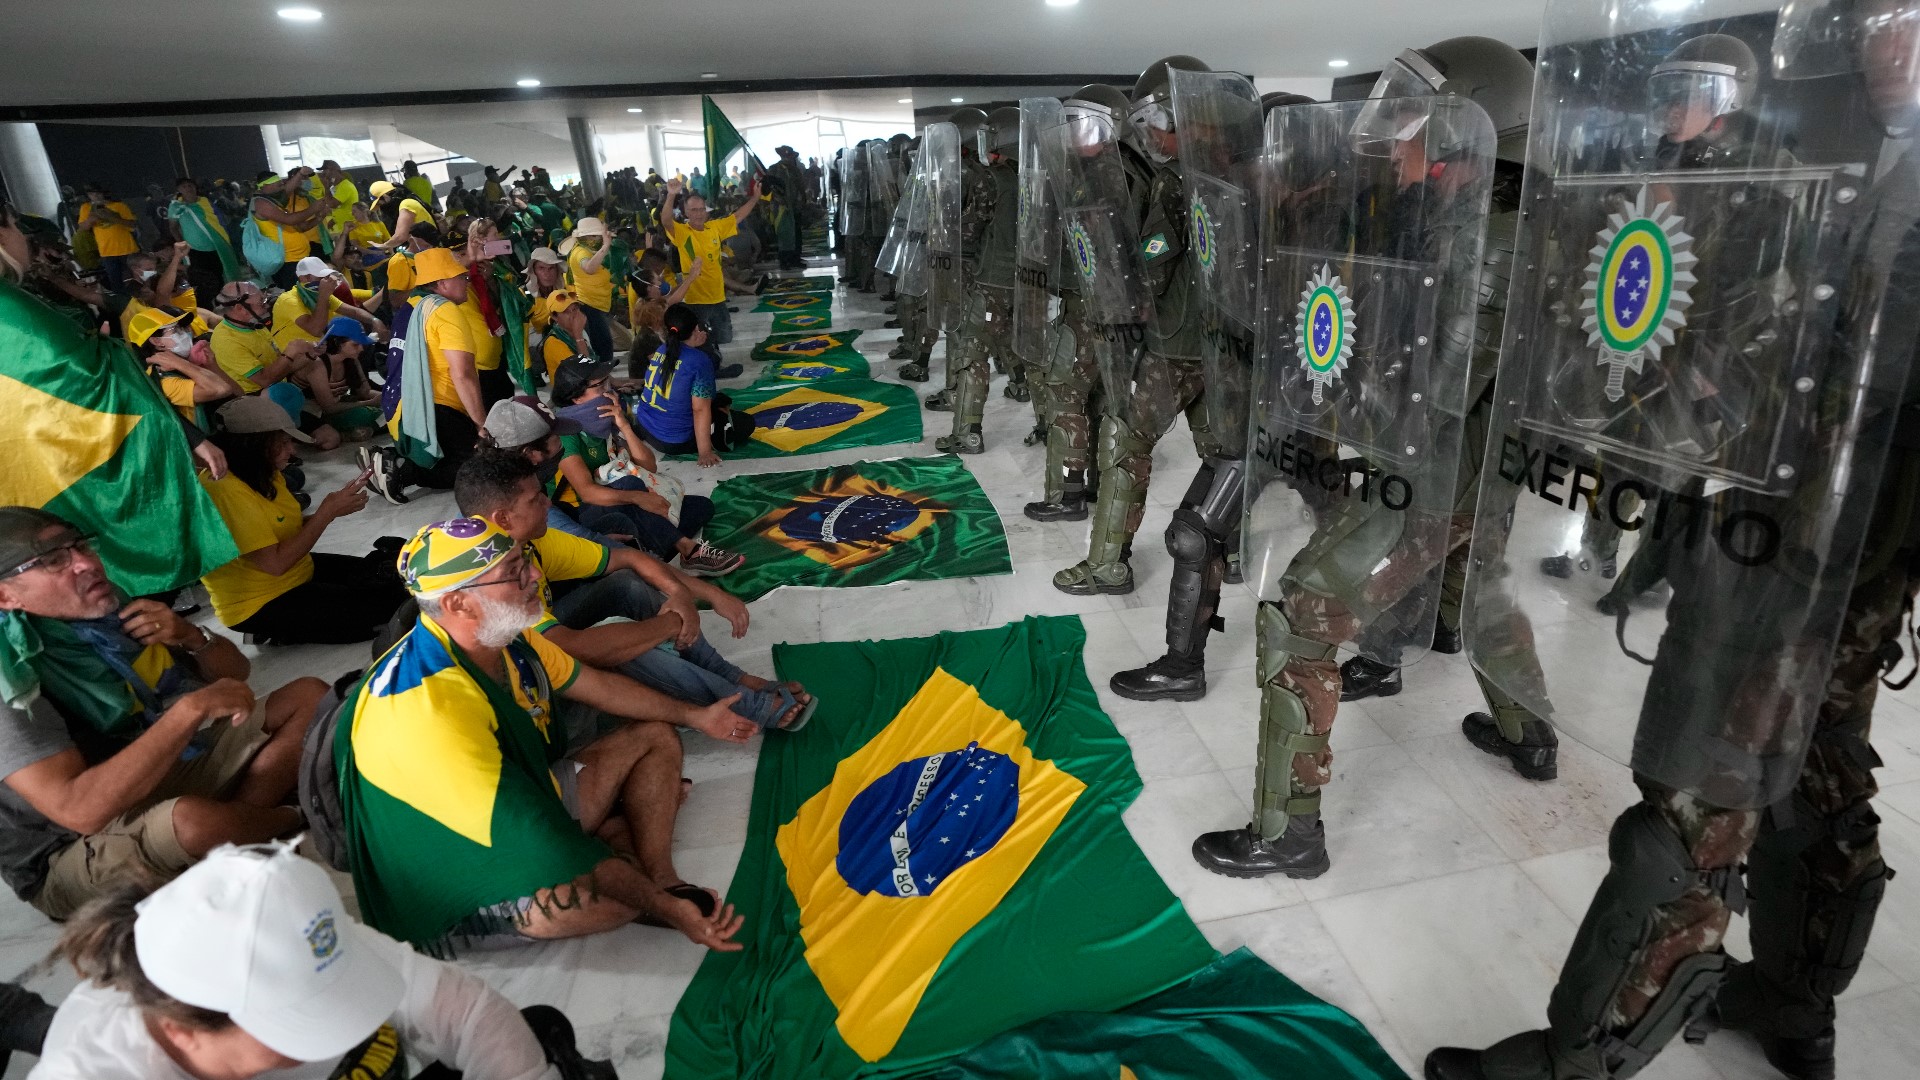 The attack happened a week after the inauguration of his leftist rival, President Luiz Inácio Lula da Silva.